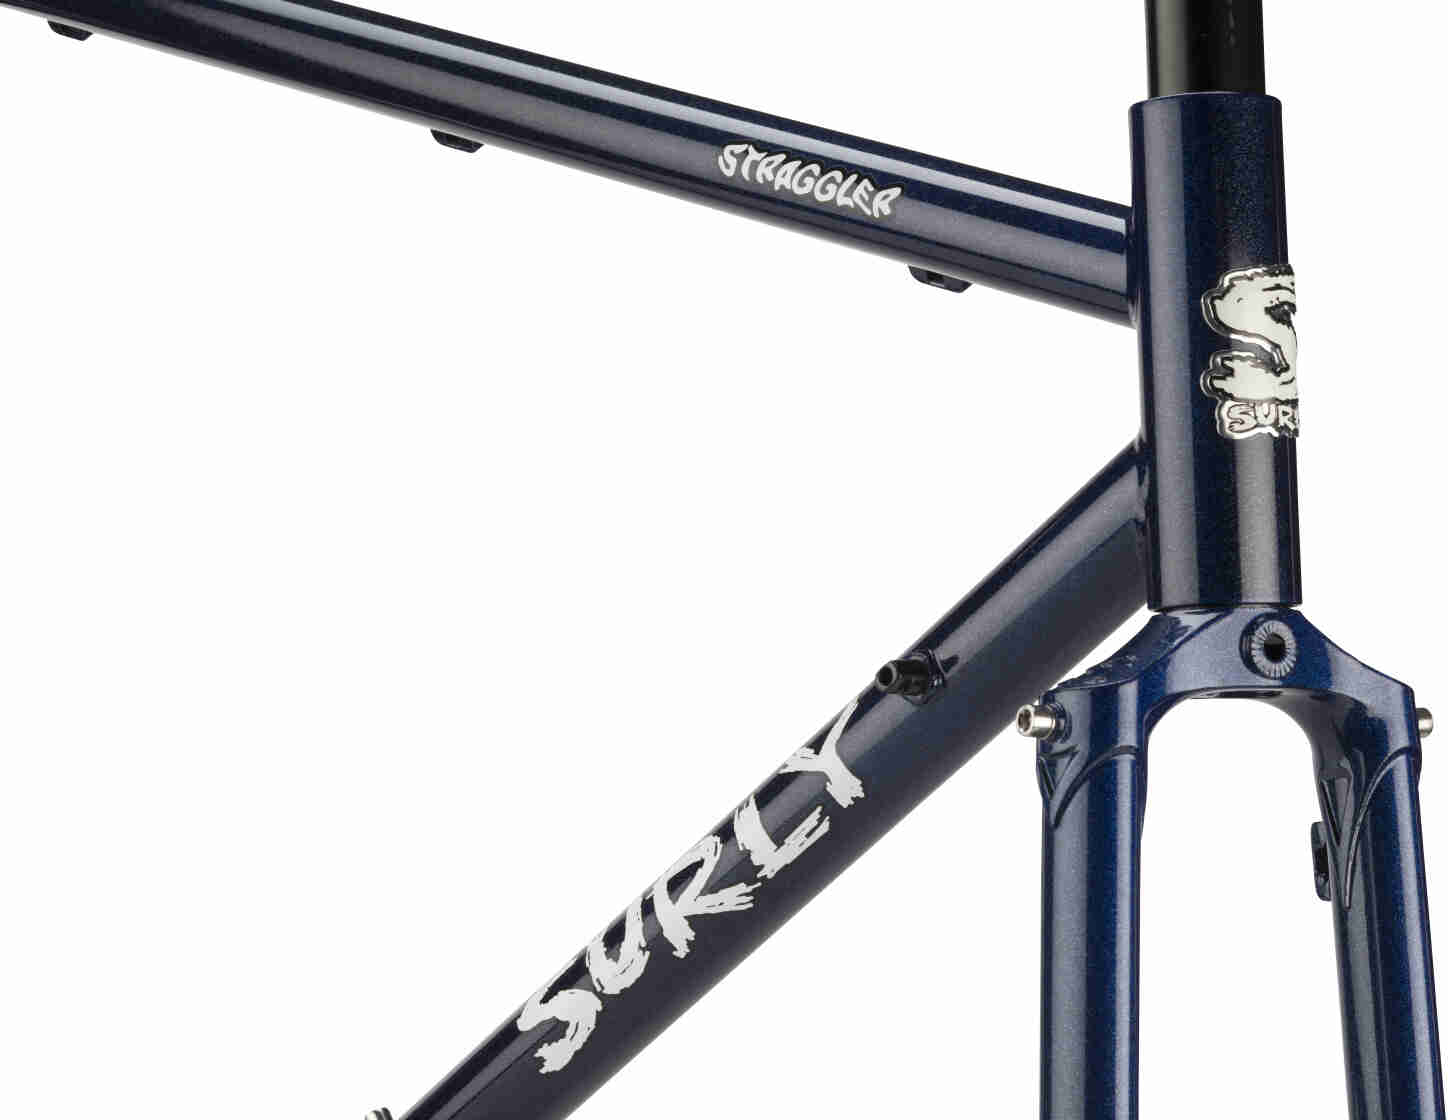 Partial view of a Surly Straggler bike frame and fork - Blueberry muffin top color